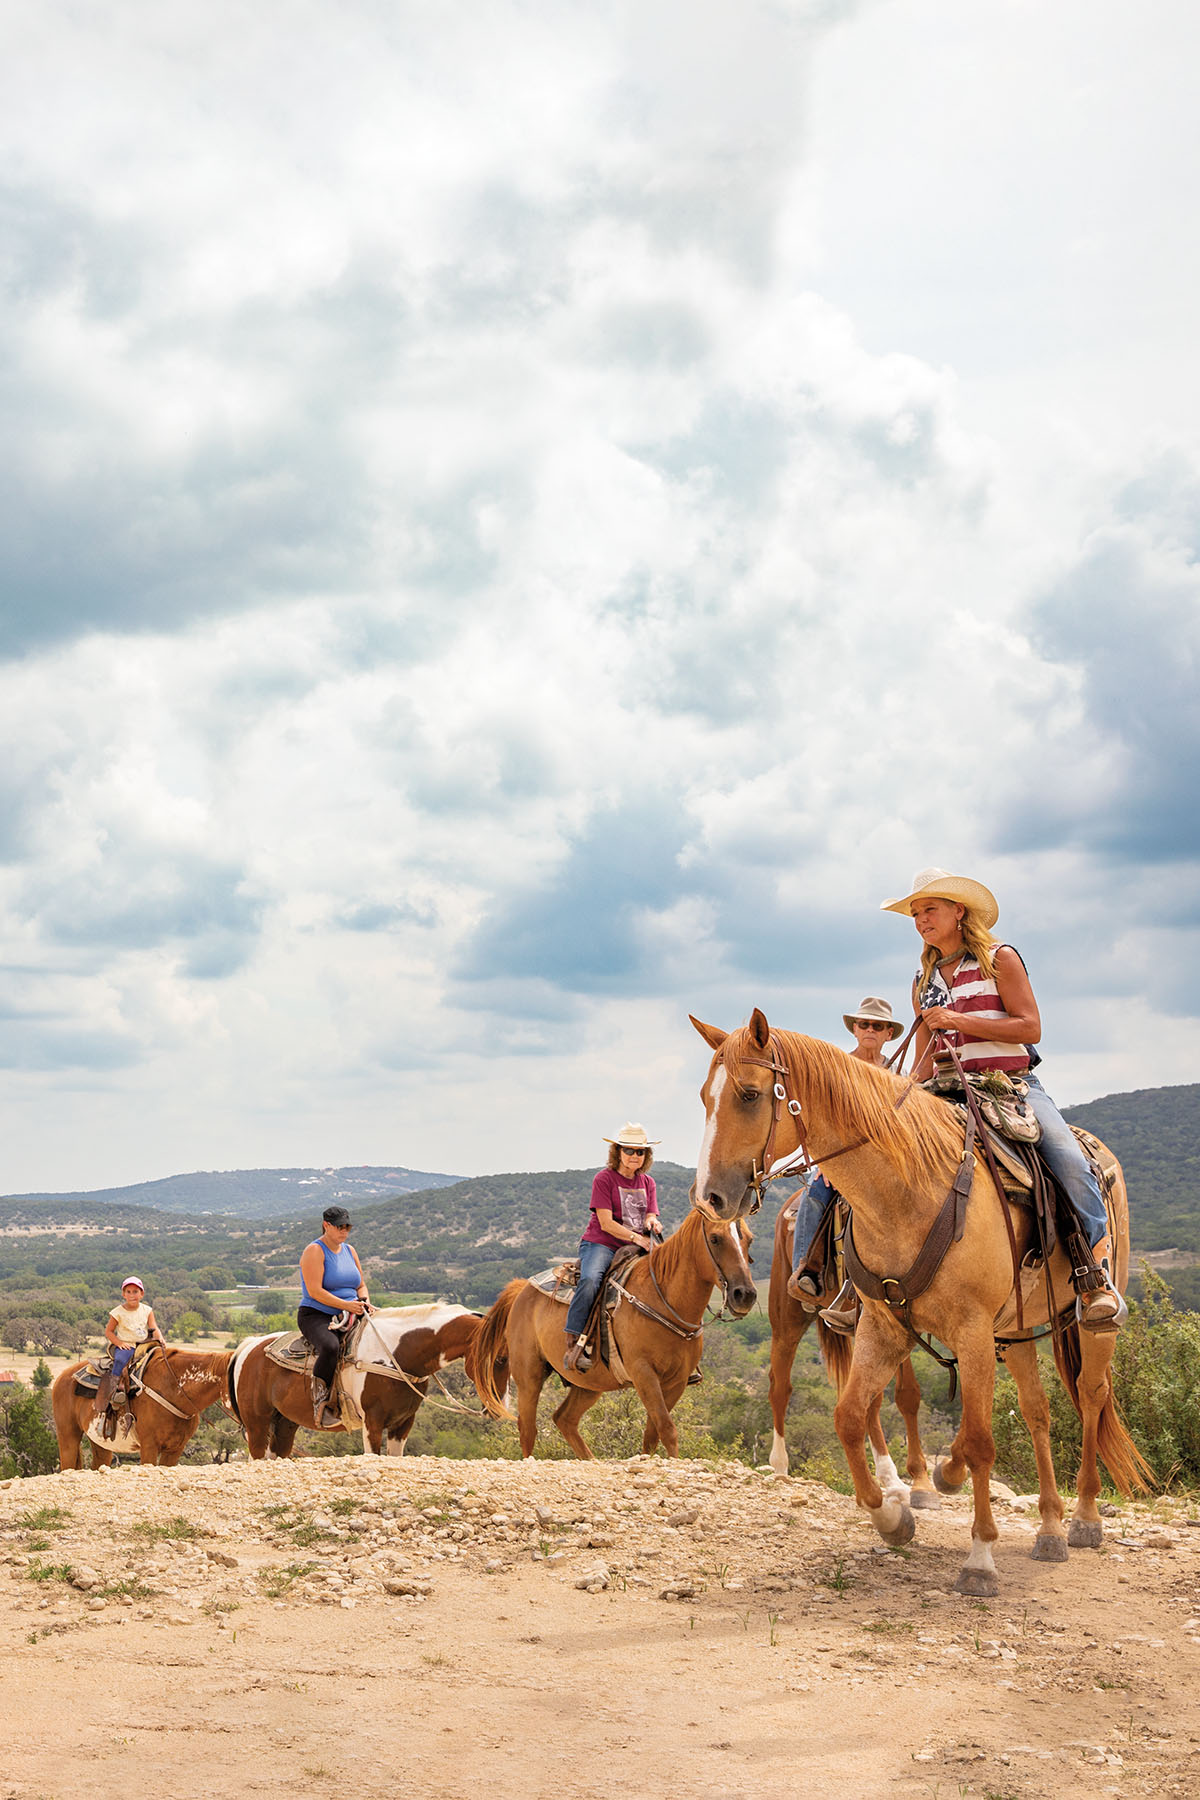 A group of people ride horses on a dusty trail under cloudy sky